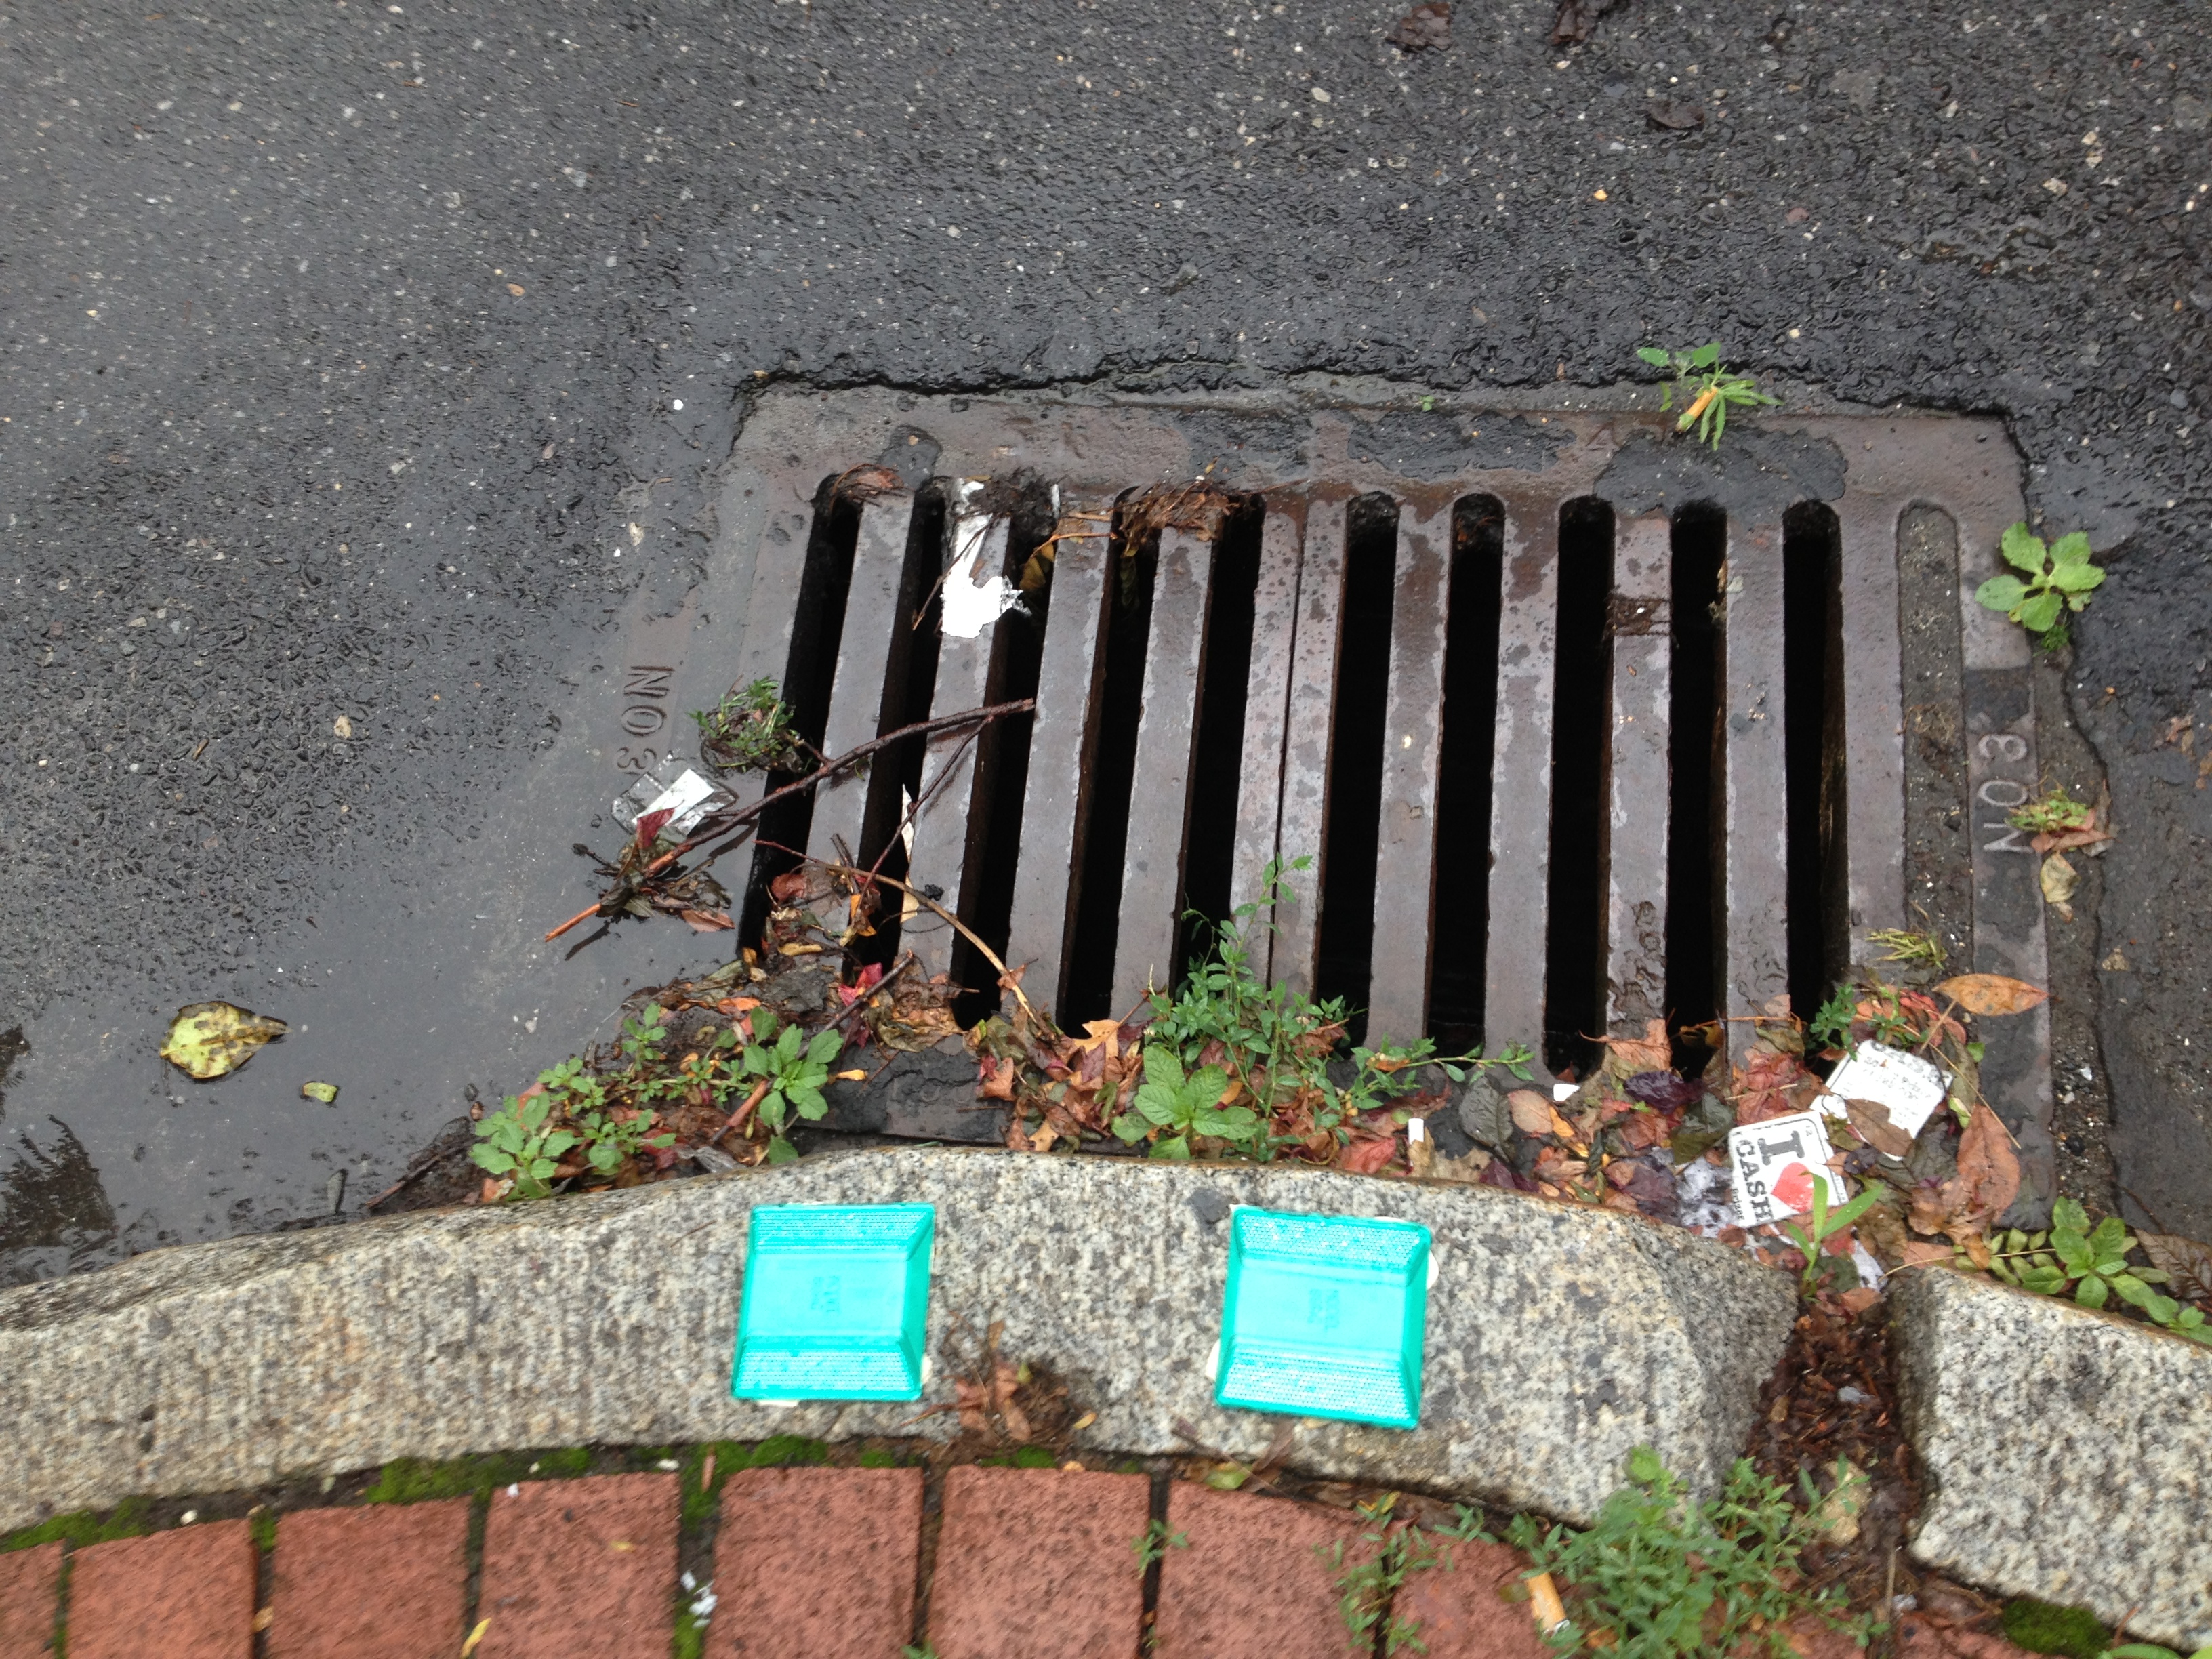 Green reflectors at storm drains trace the outflow pipe.